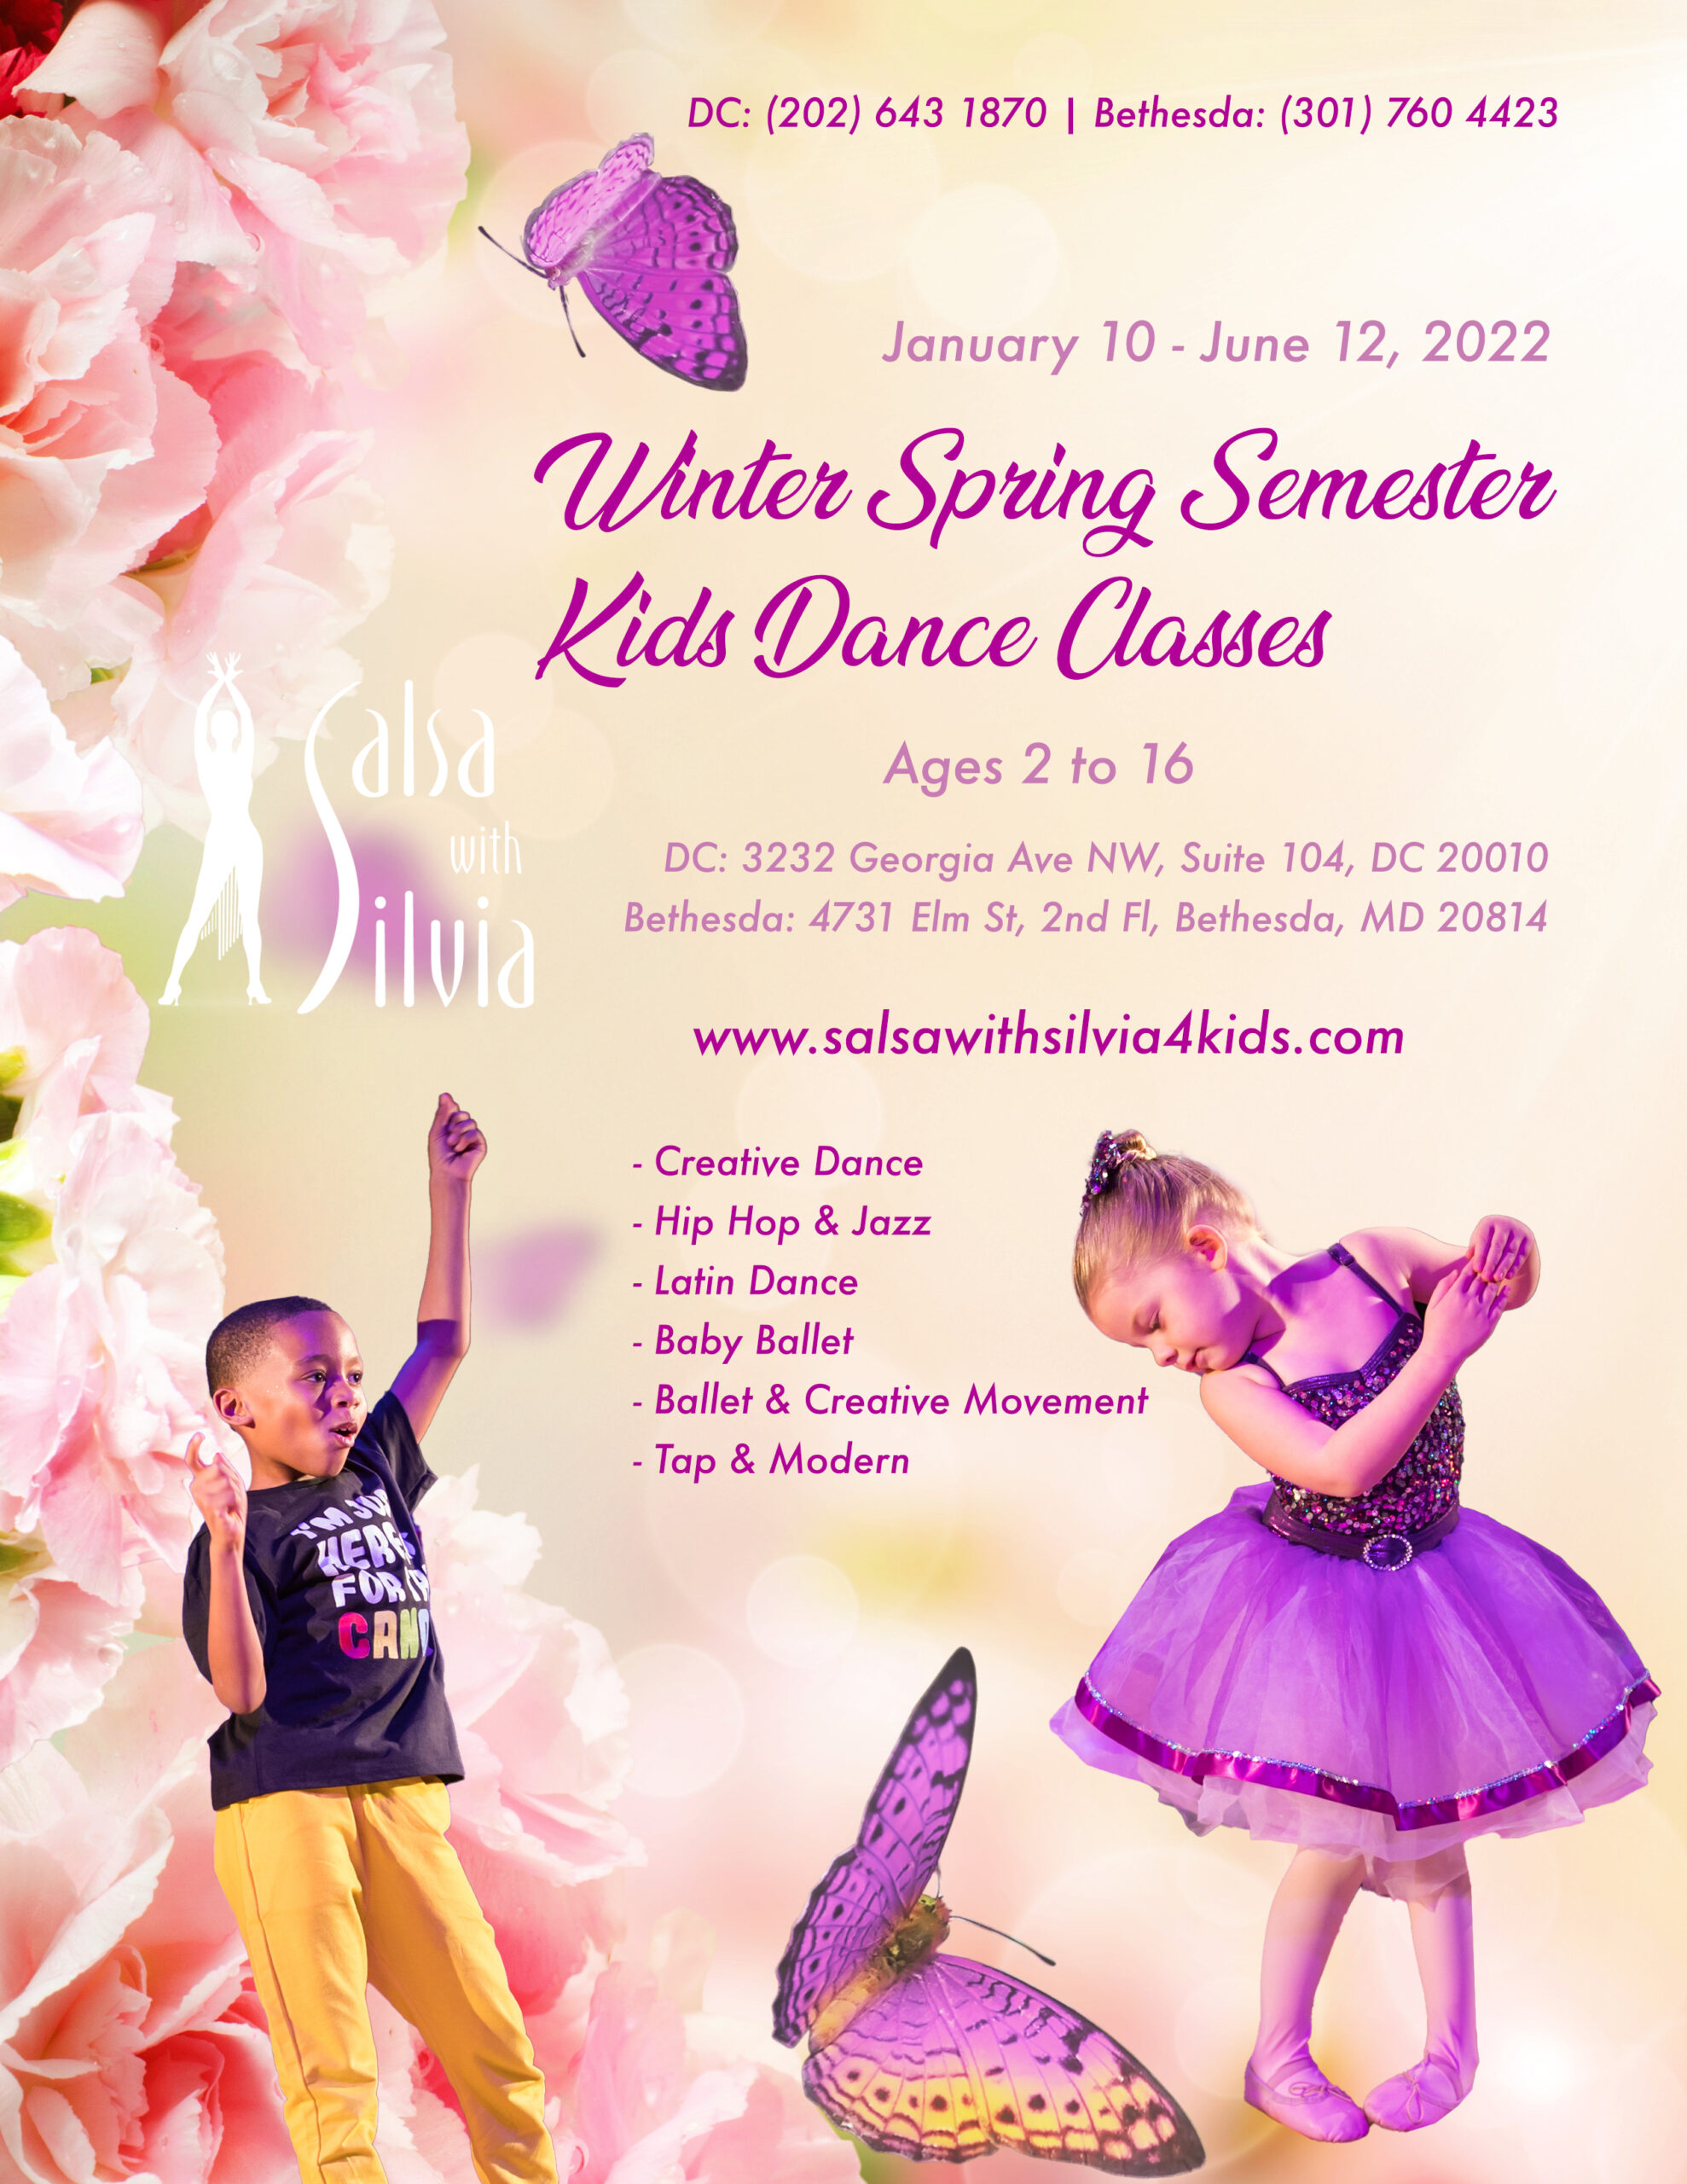 The Salsa With Silvia Dance Studio Offers Ballet, Tap, Jazz, Latin, Hip Hop and more dance classes for kids in DC and Bethesda